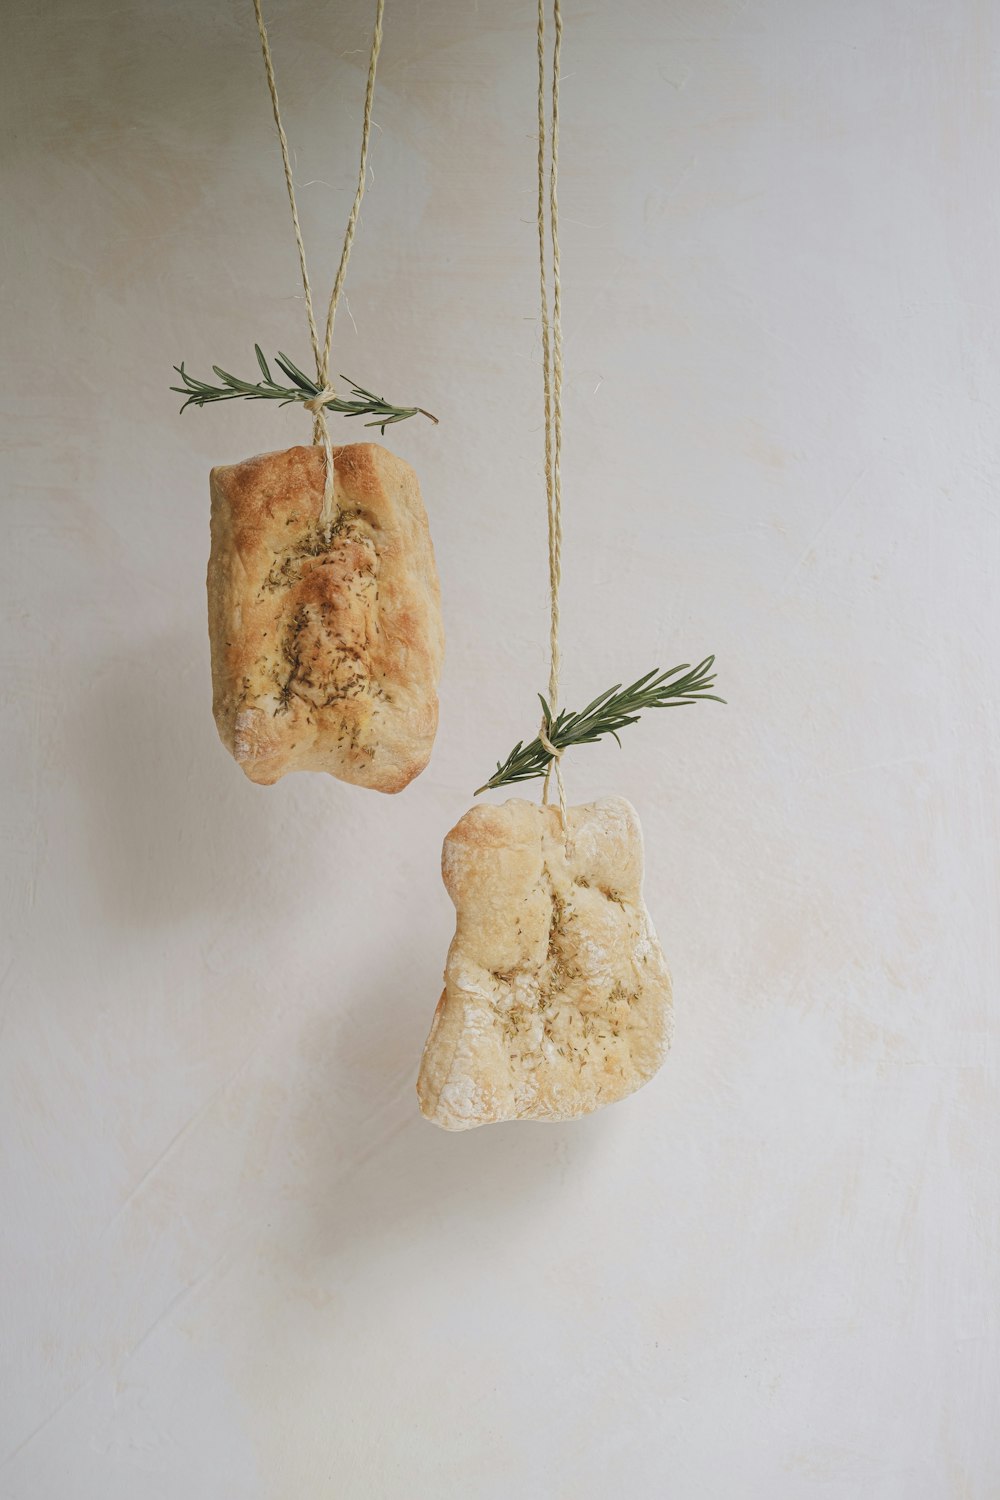 a couple of pieces of bread hanging from strings